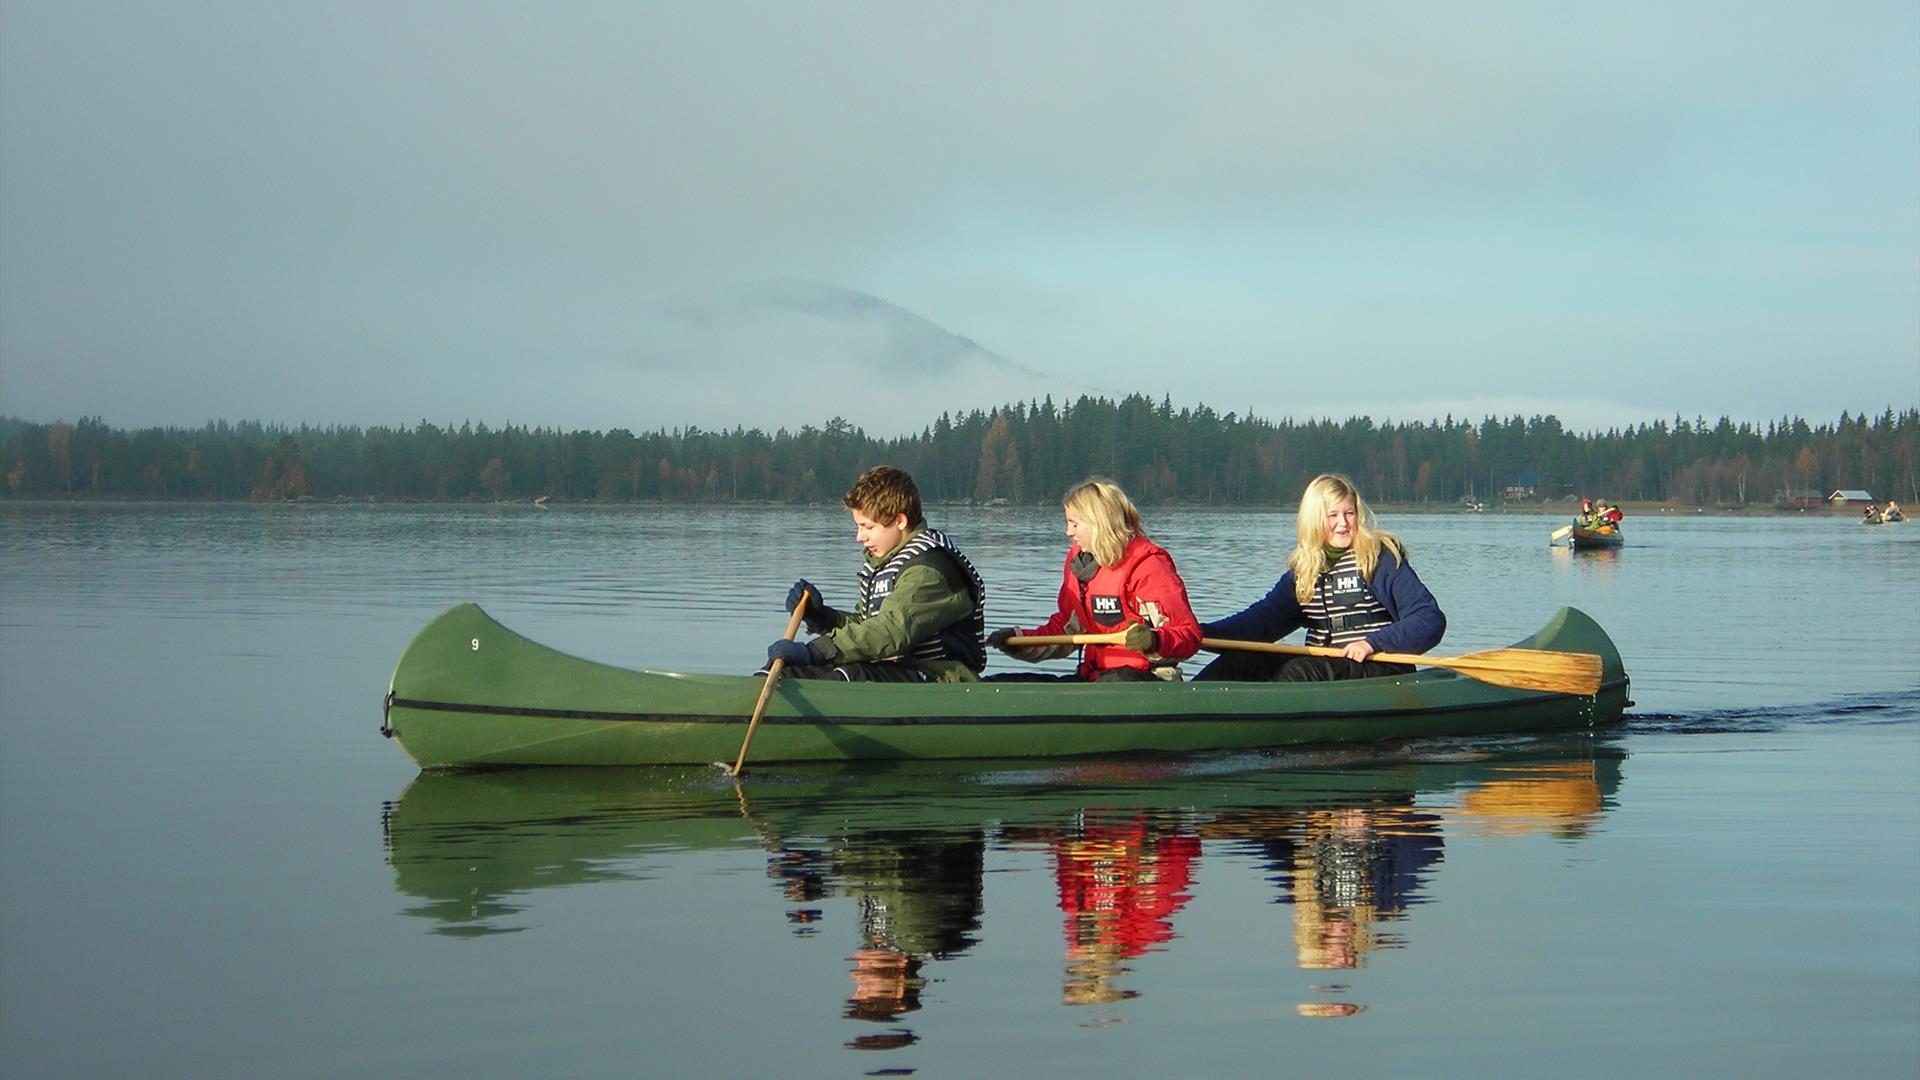 Canoeing with three people